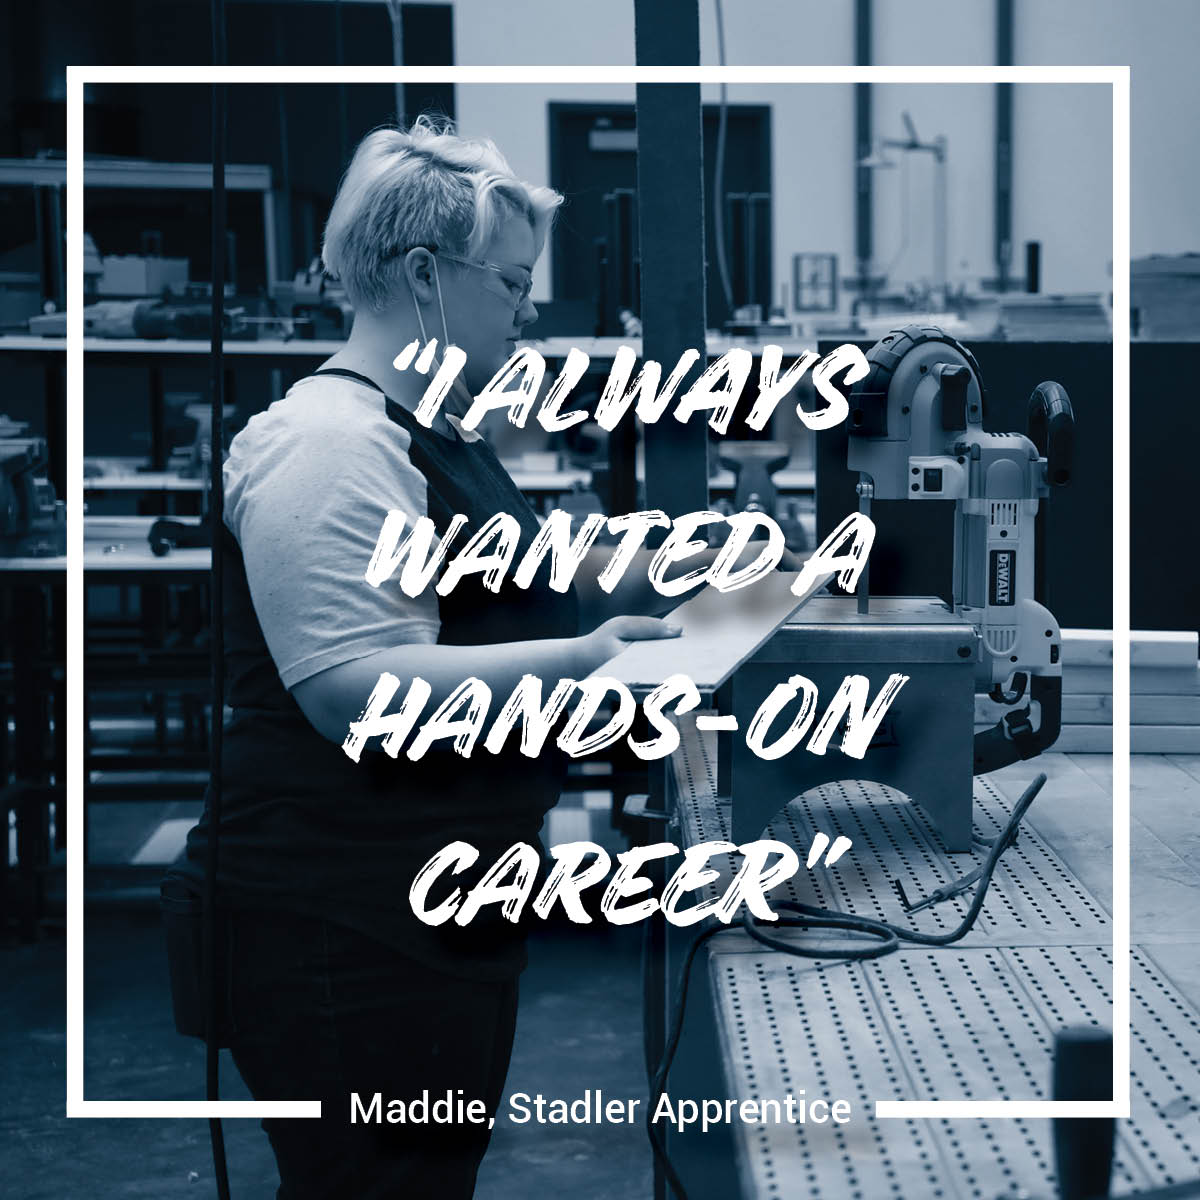 Like Maddie there are 4,400+ active #apprentices in Utah who get to get paid to learn job skills. There is more than one path to landing that dream career.

@ApprenticeUtah #NAW2021 #NationalApprenticeshipWeek #WomenInManufacturing #CareerReady